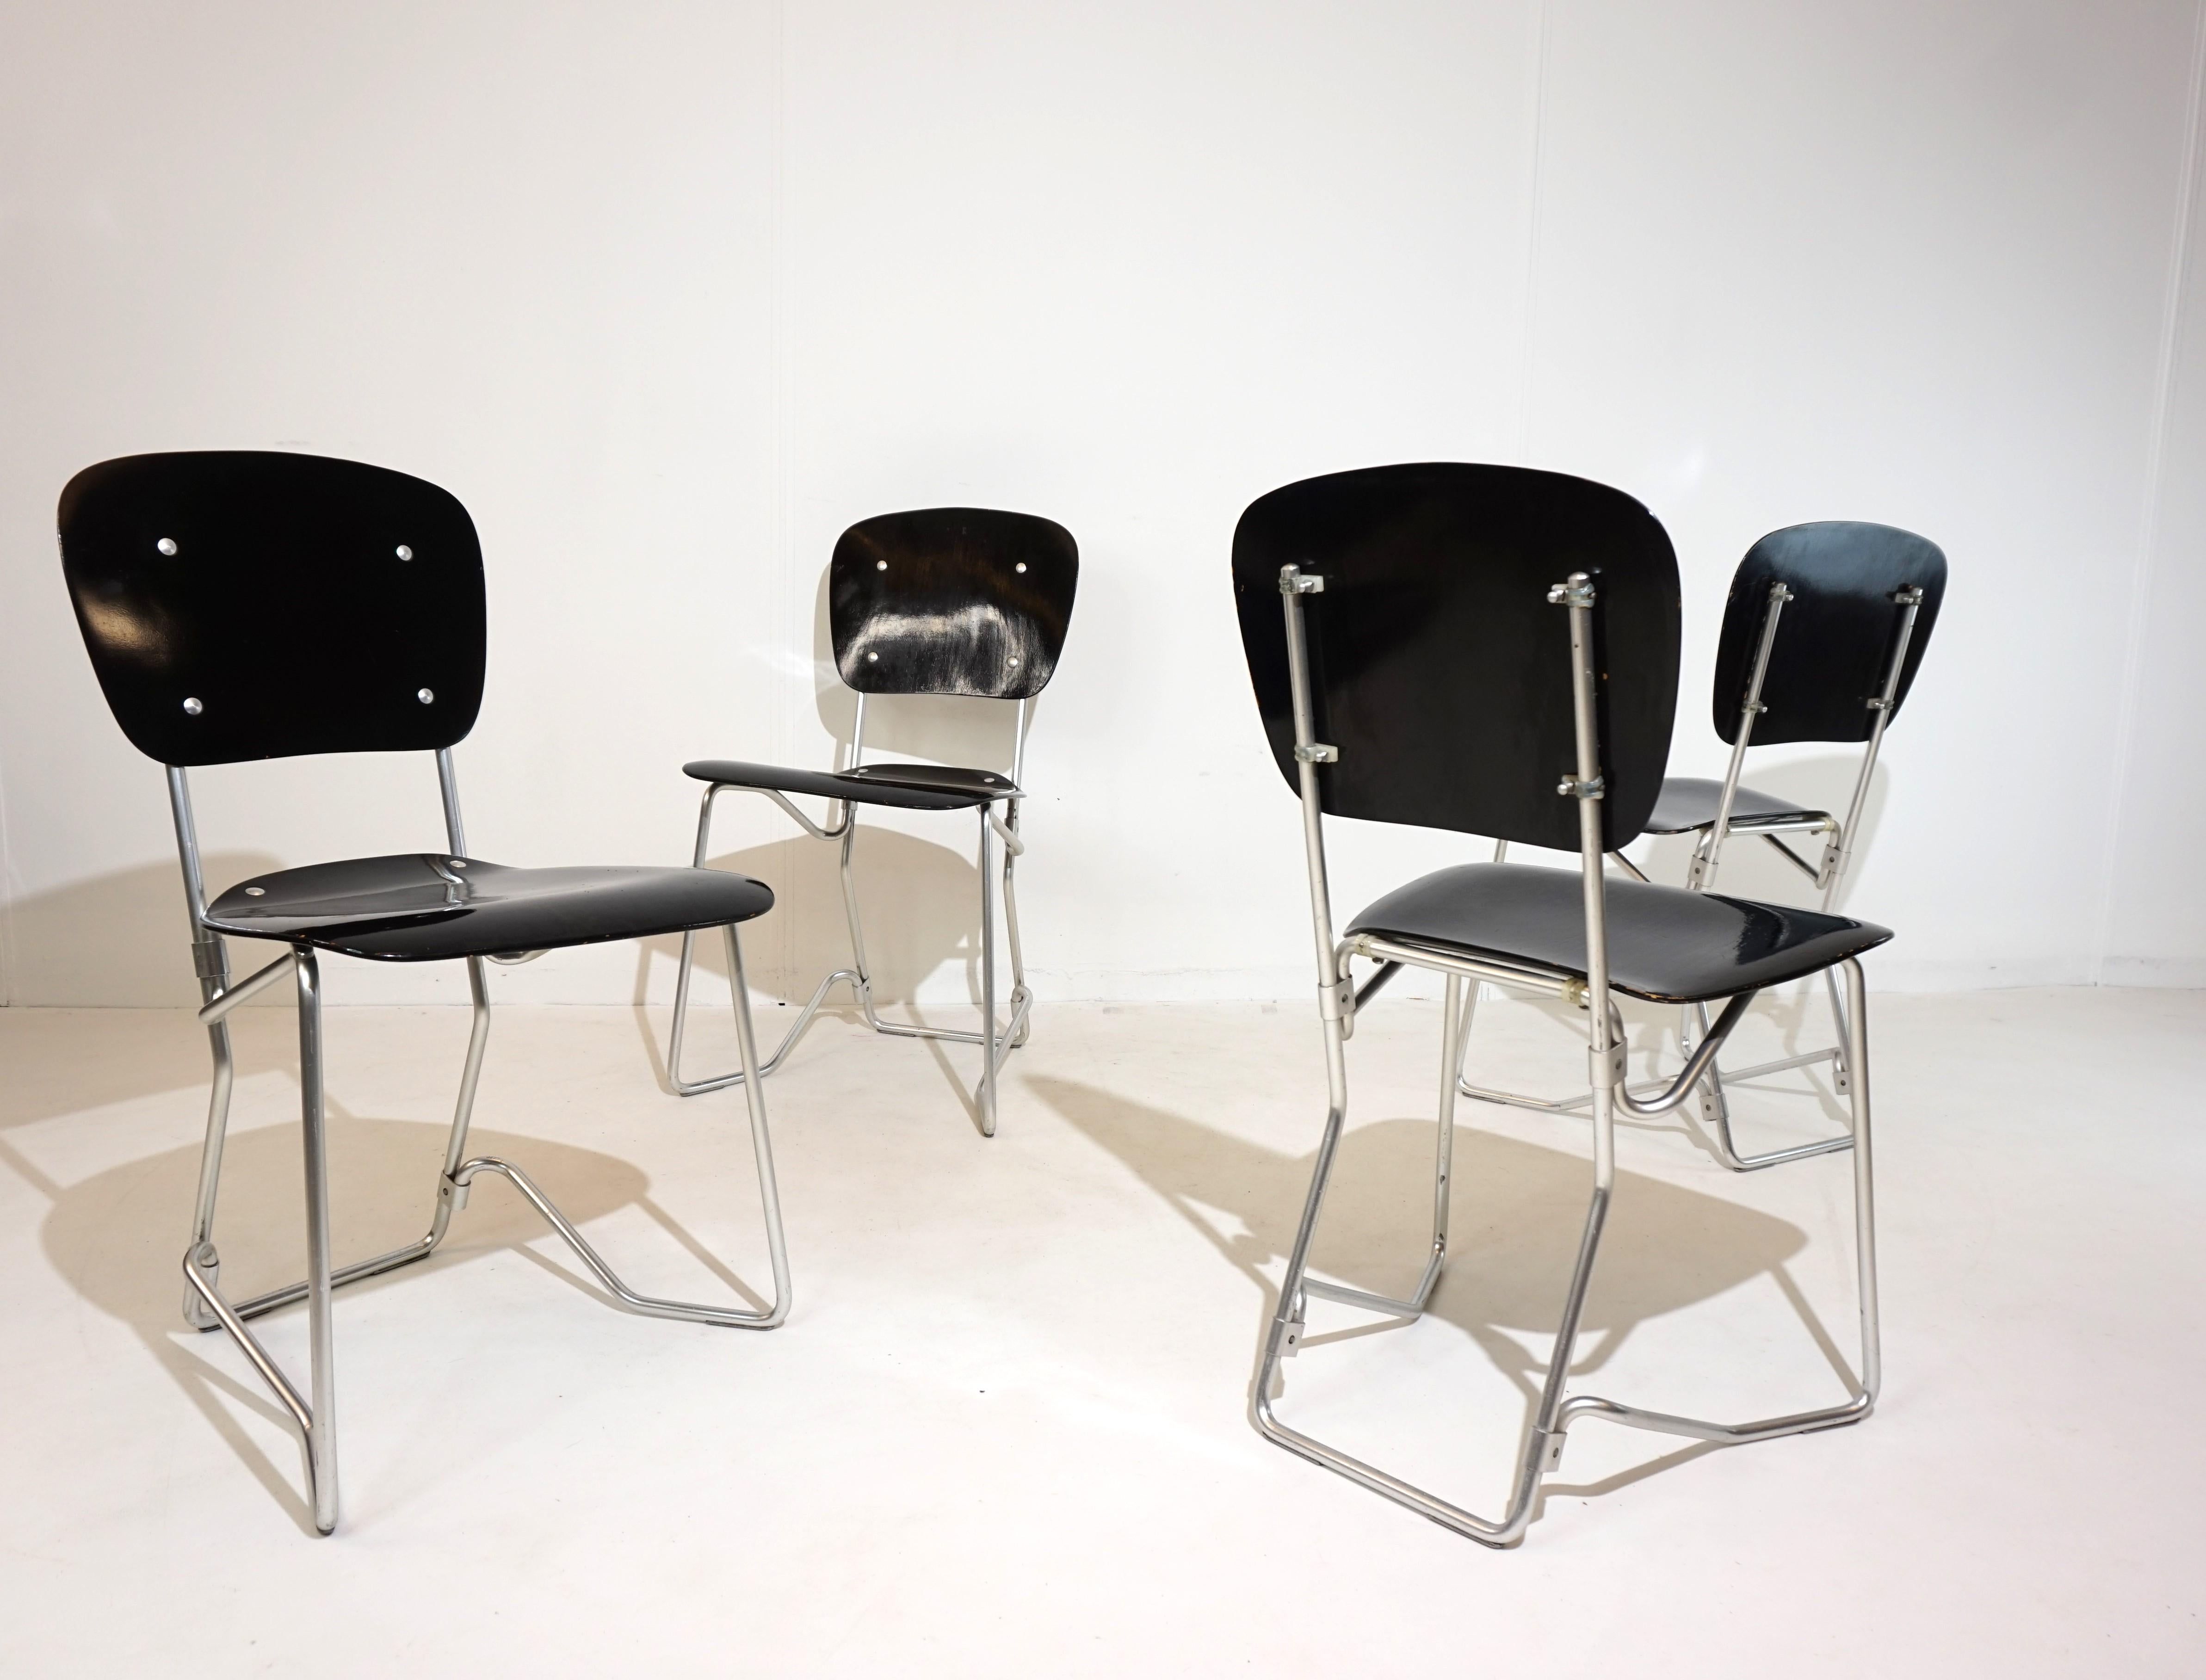 Aluflex set of 4 stacking chairs by Armin Wirth for Ph. Zieringer In Good Condition For Sale In Ludwigslust, DE